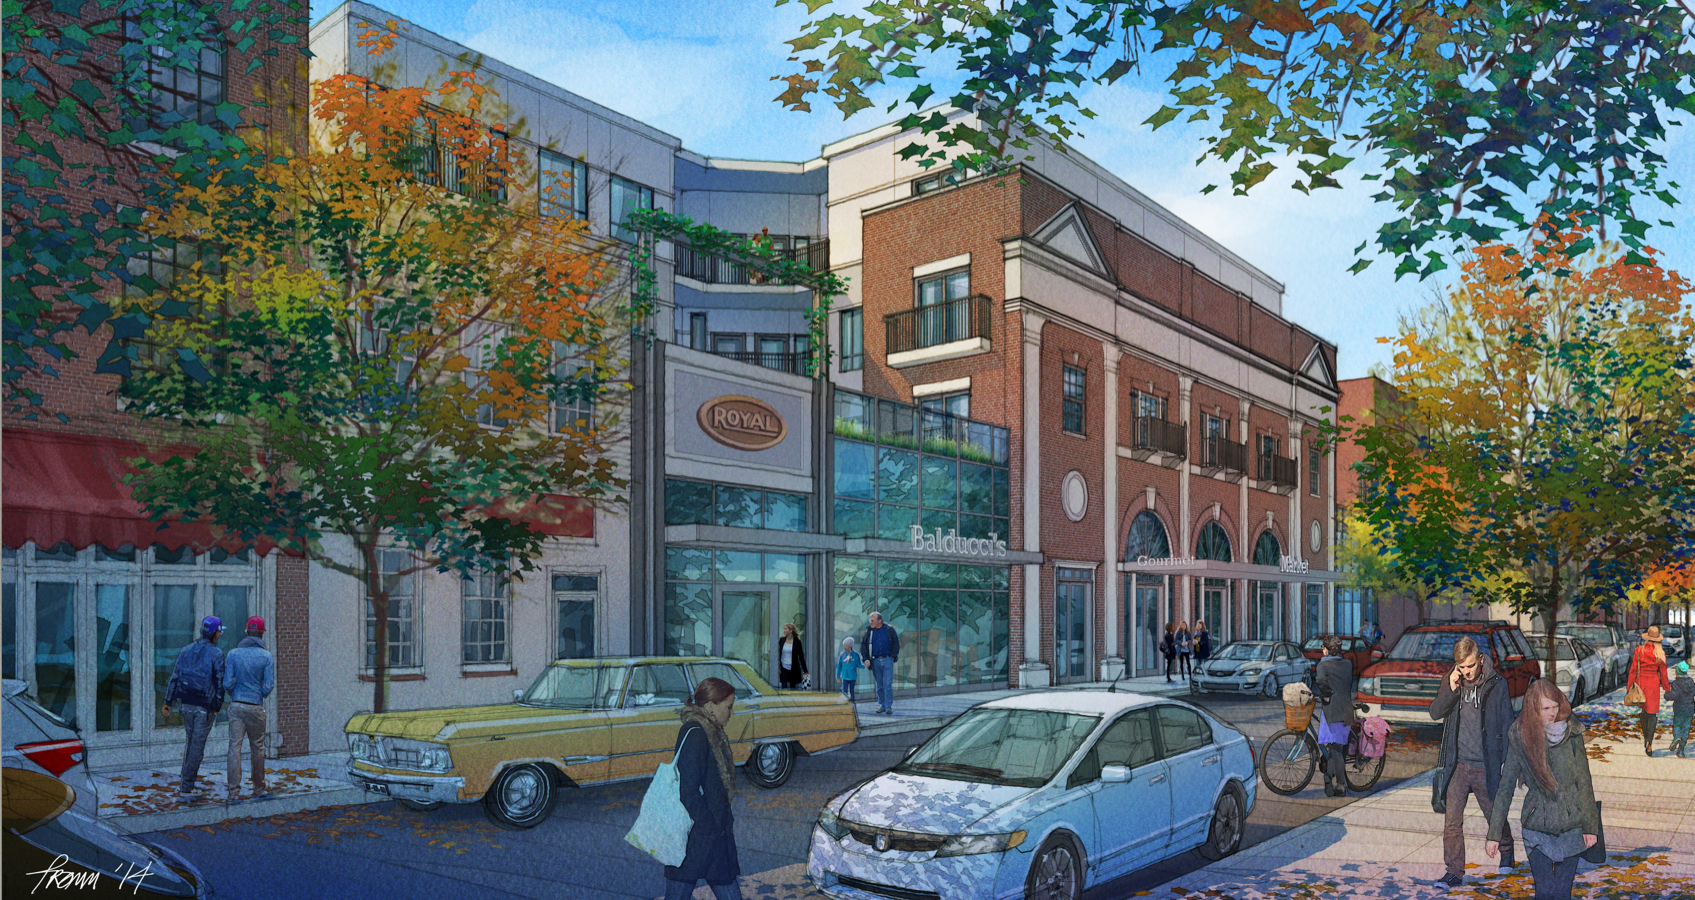 Rendering of redevelopment incorporating historic South Street facade of Royal Theater into mixed-use development | J Davis Architects